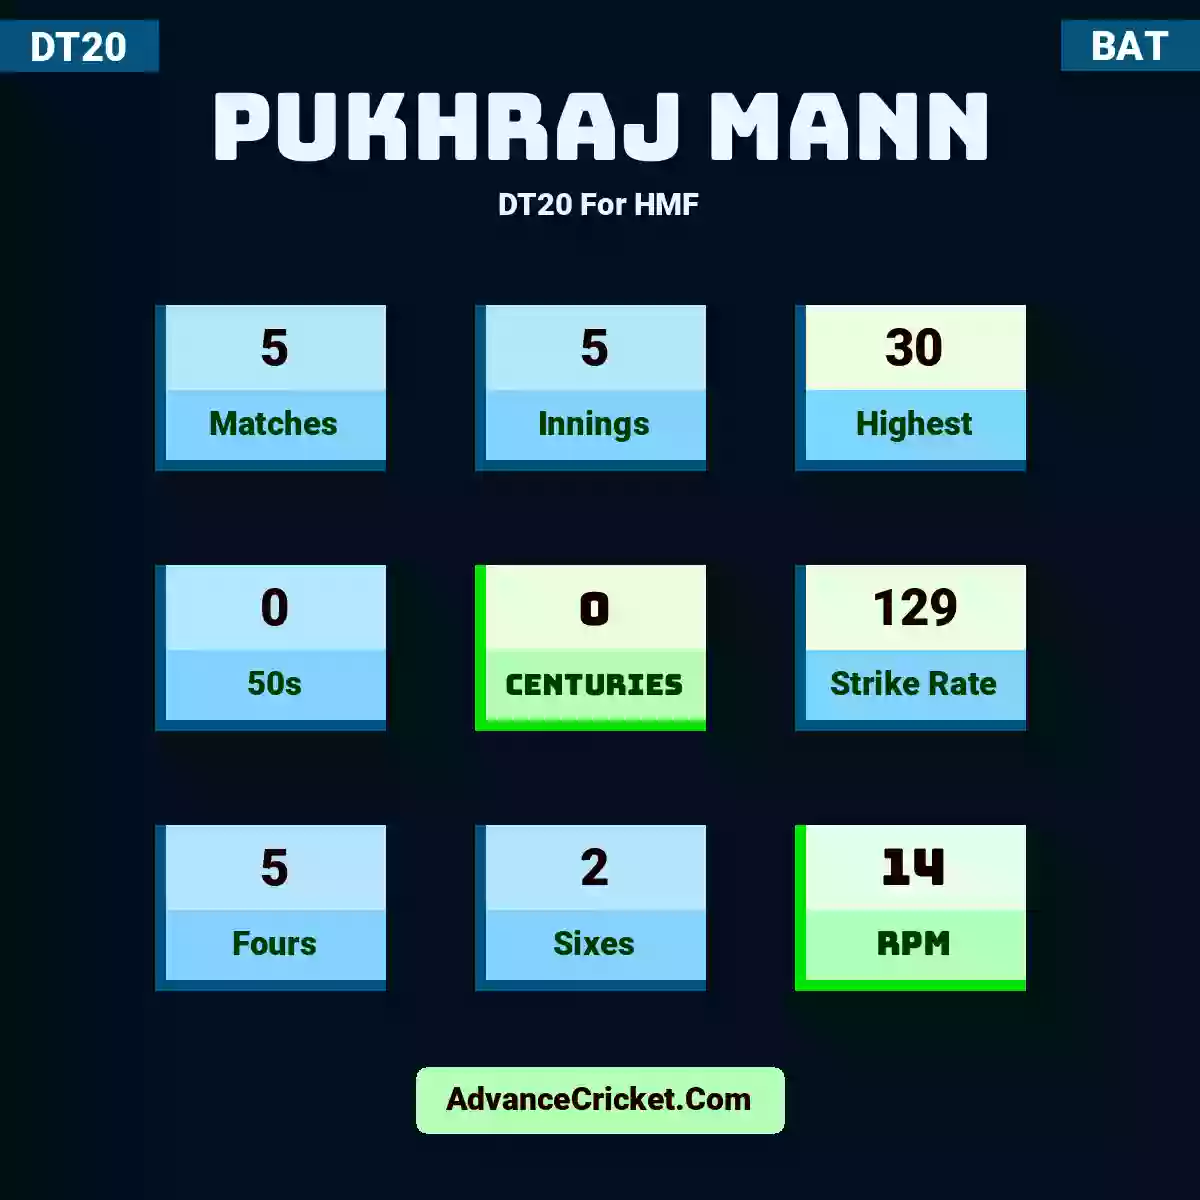 Pukhraj Mann DT20  For HMF, Pukhraj Mann played 5 matches, scored 30 runs as highest, 0 half-centuries, and 0 centuries, with a strike rate of 129. P.Mann hit 5 fours and 2 sixes, with an RPM of 14.